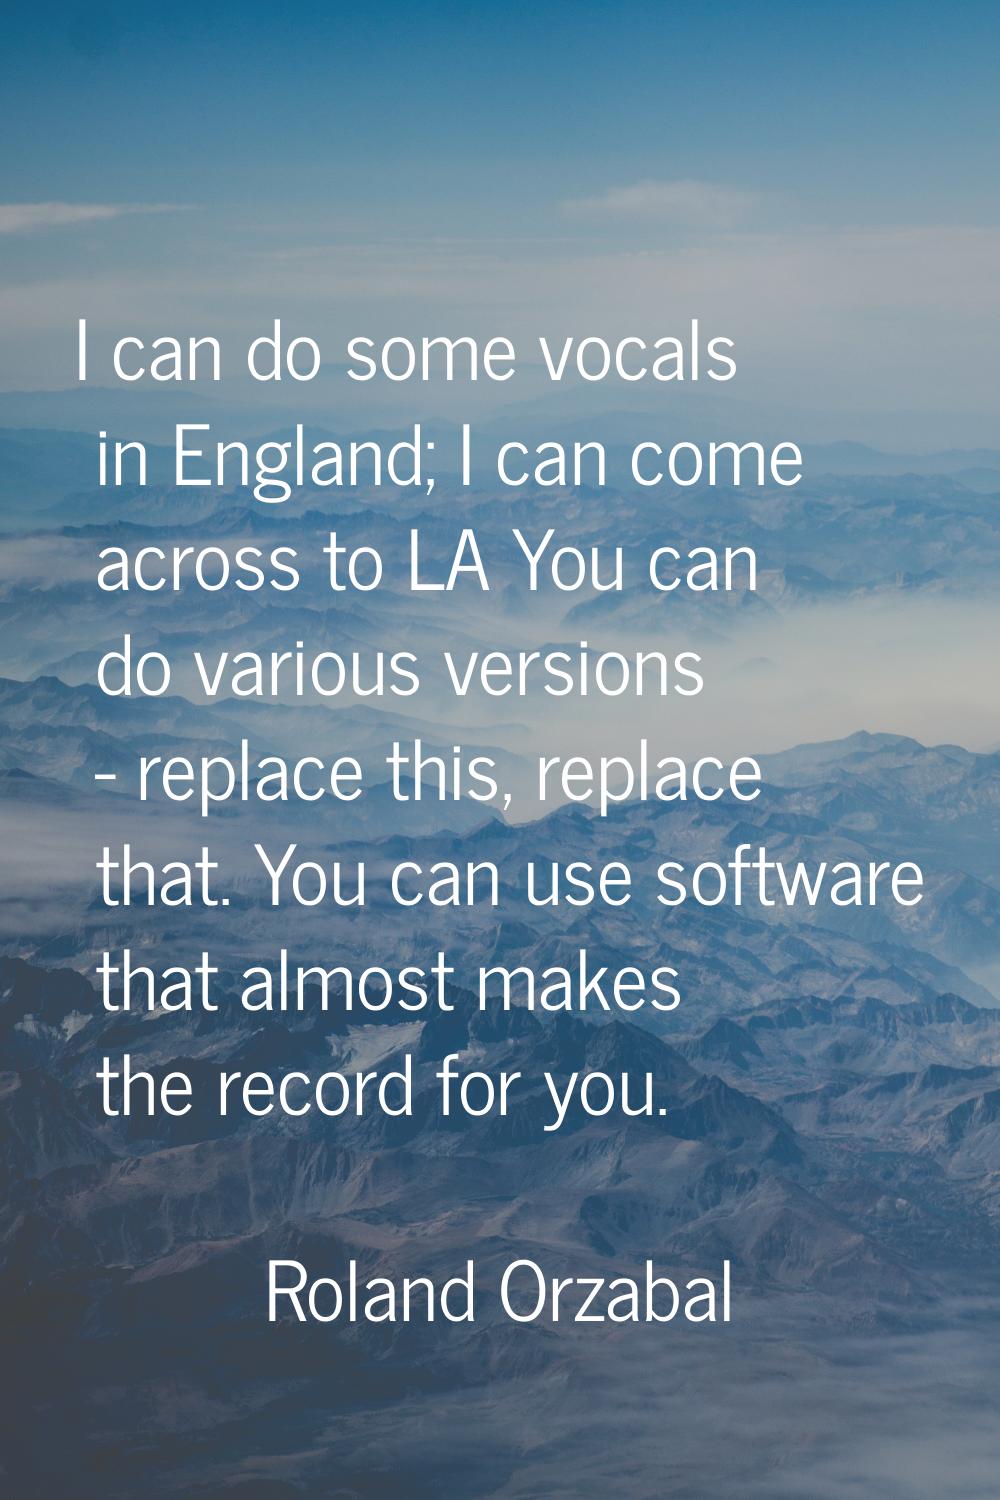 I can do some vocals in England; I can come across to LA You can do various versions - replace this